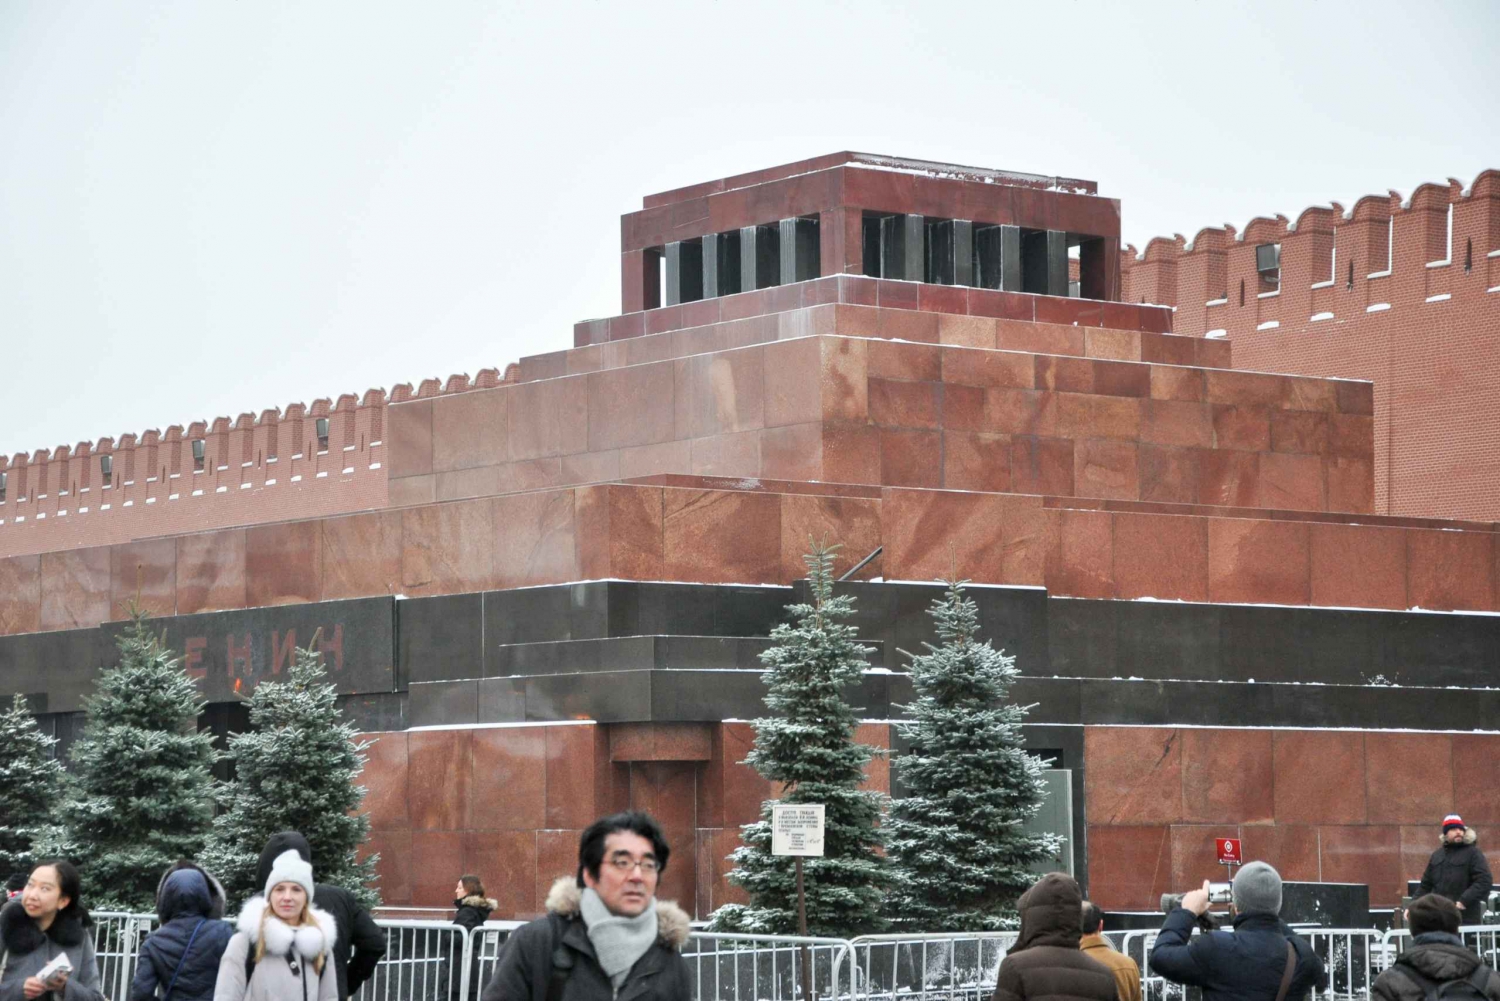 Moscow: Communist Moscow Tour with Lenin's Masoleum Visit